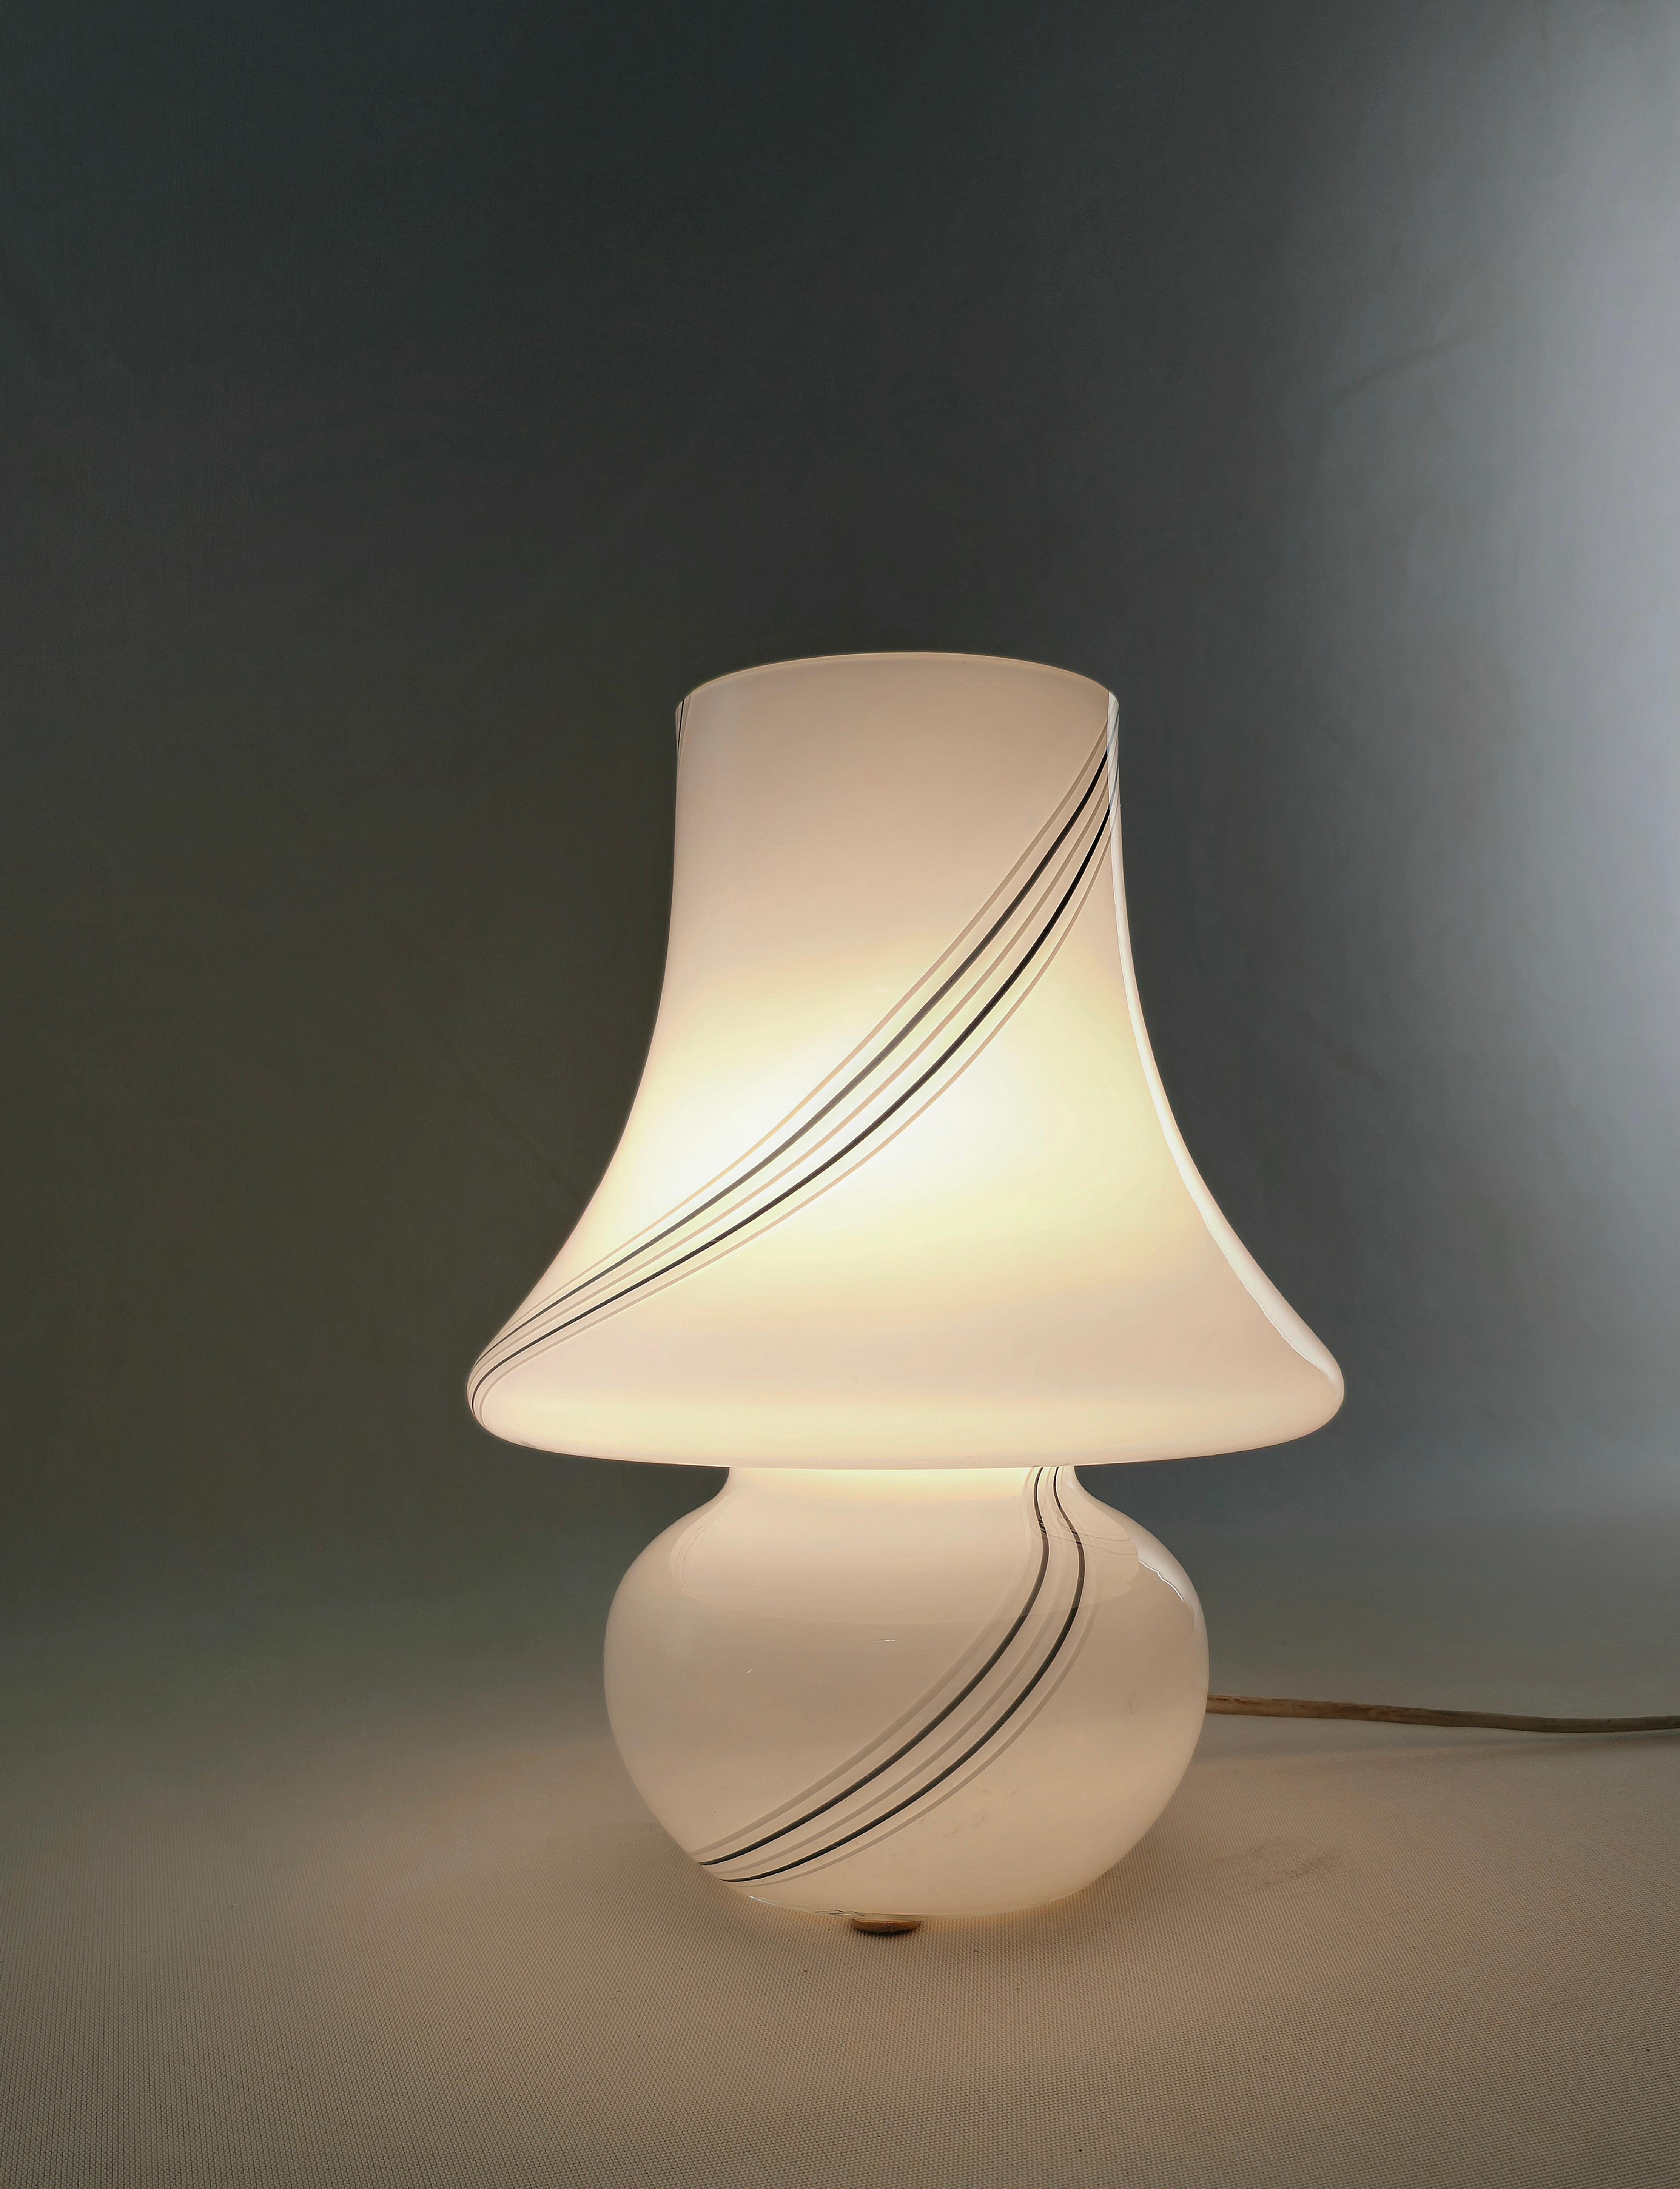 Mushroom-shaped table lamp made of white layered Murano glass with the 